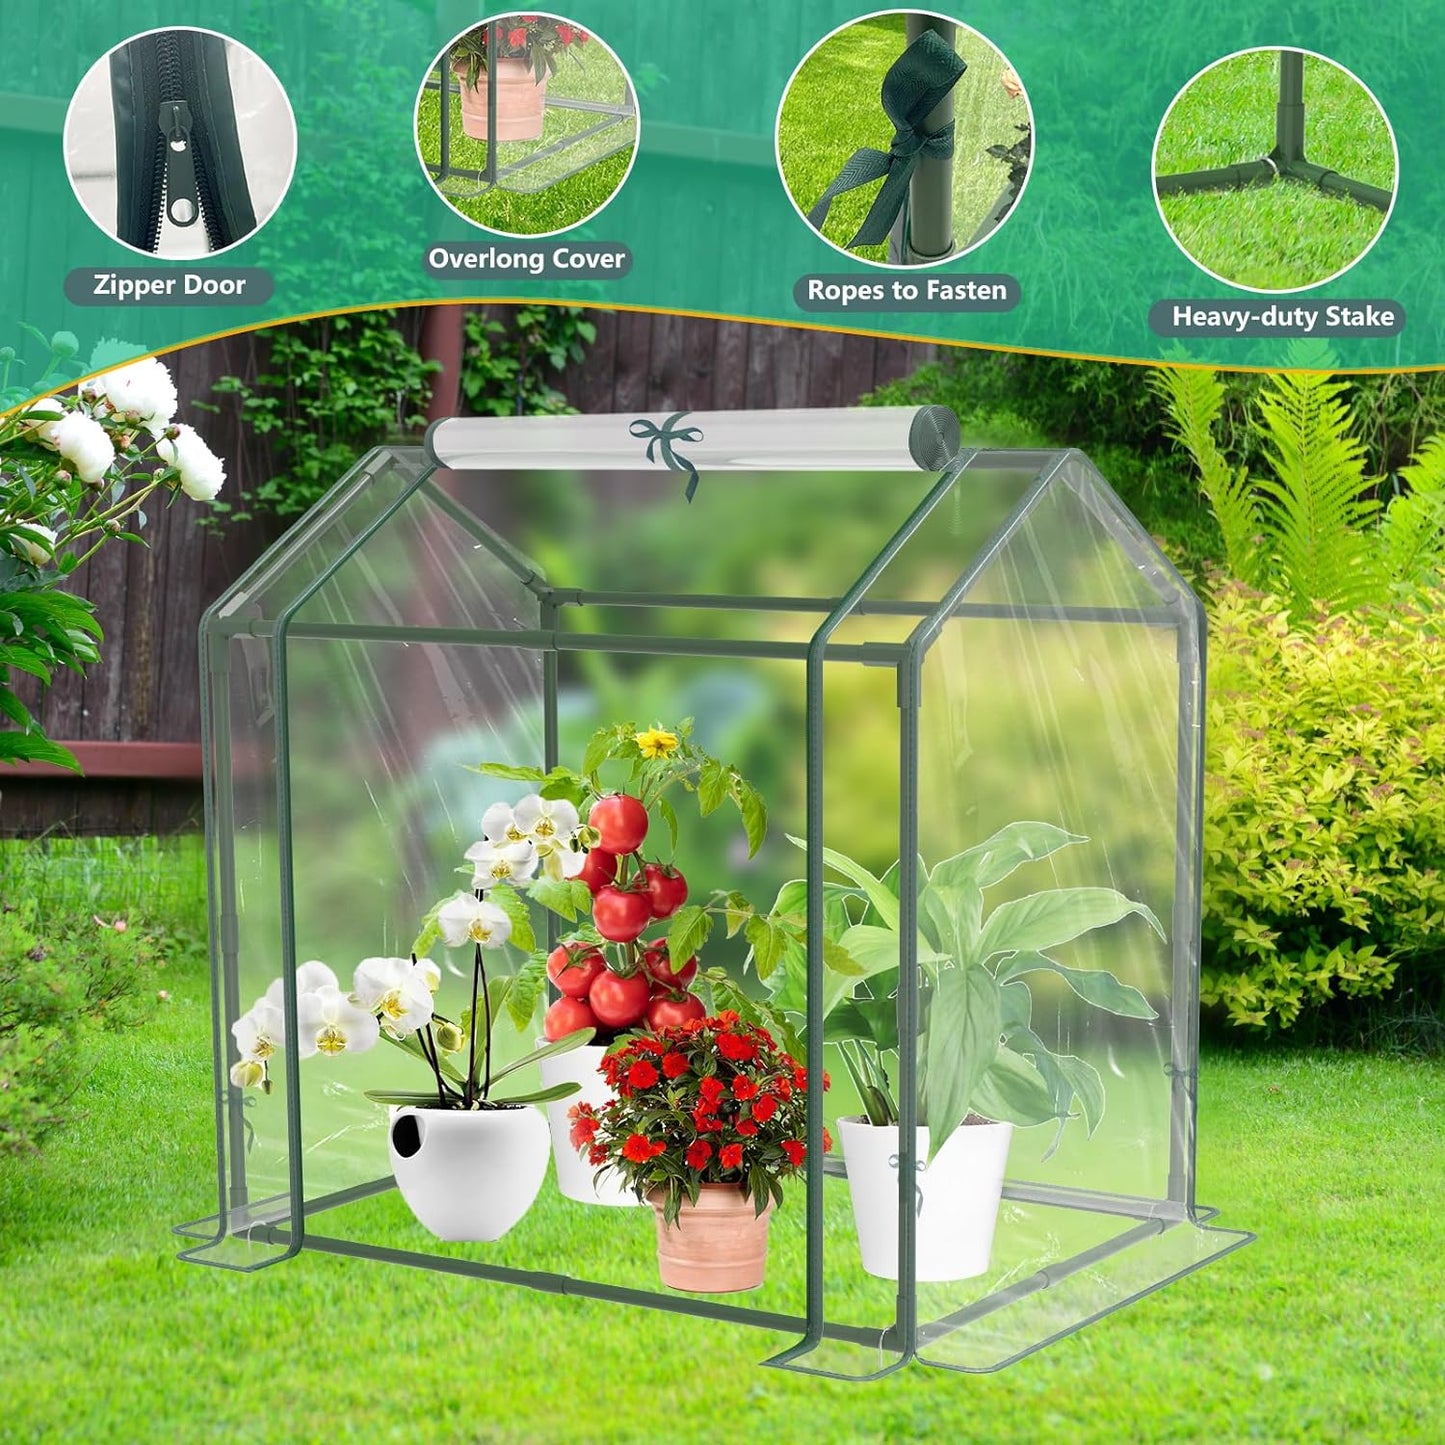 Mini Greenhouse,33.5”X 23.2”X 32.5” Greenhouse Tent for Indoor Outdoor,Durable Green House Kit with PVC Cover,Small Green House Garden Nursery Plant Cover Tent for Gardening Germination and Seedling